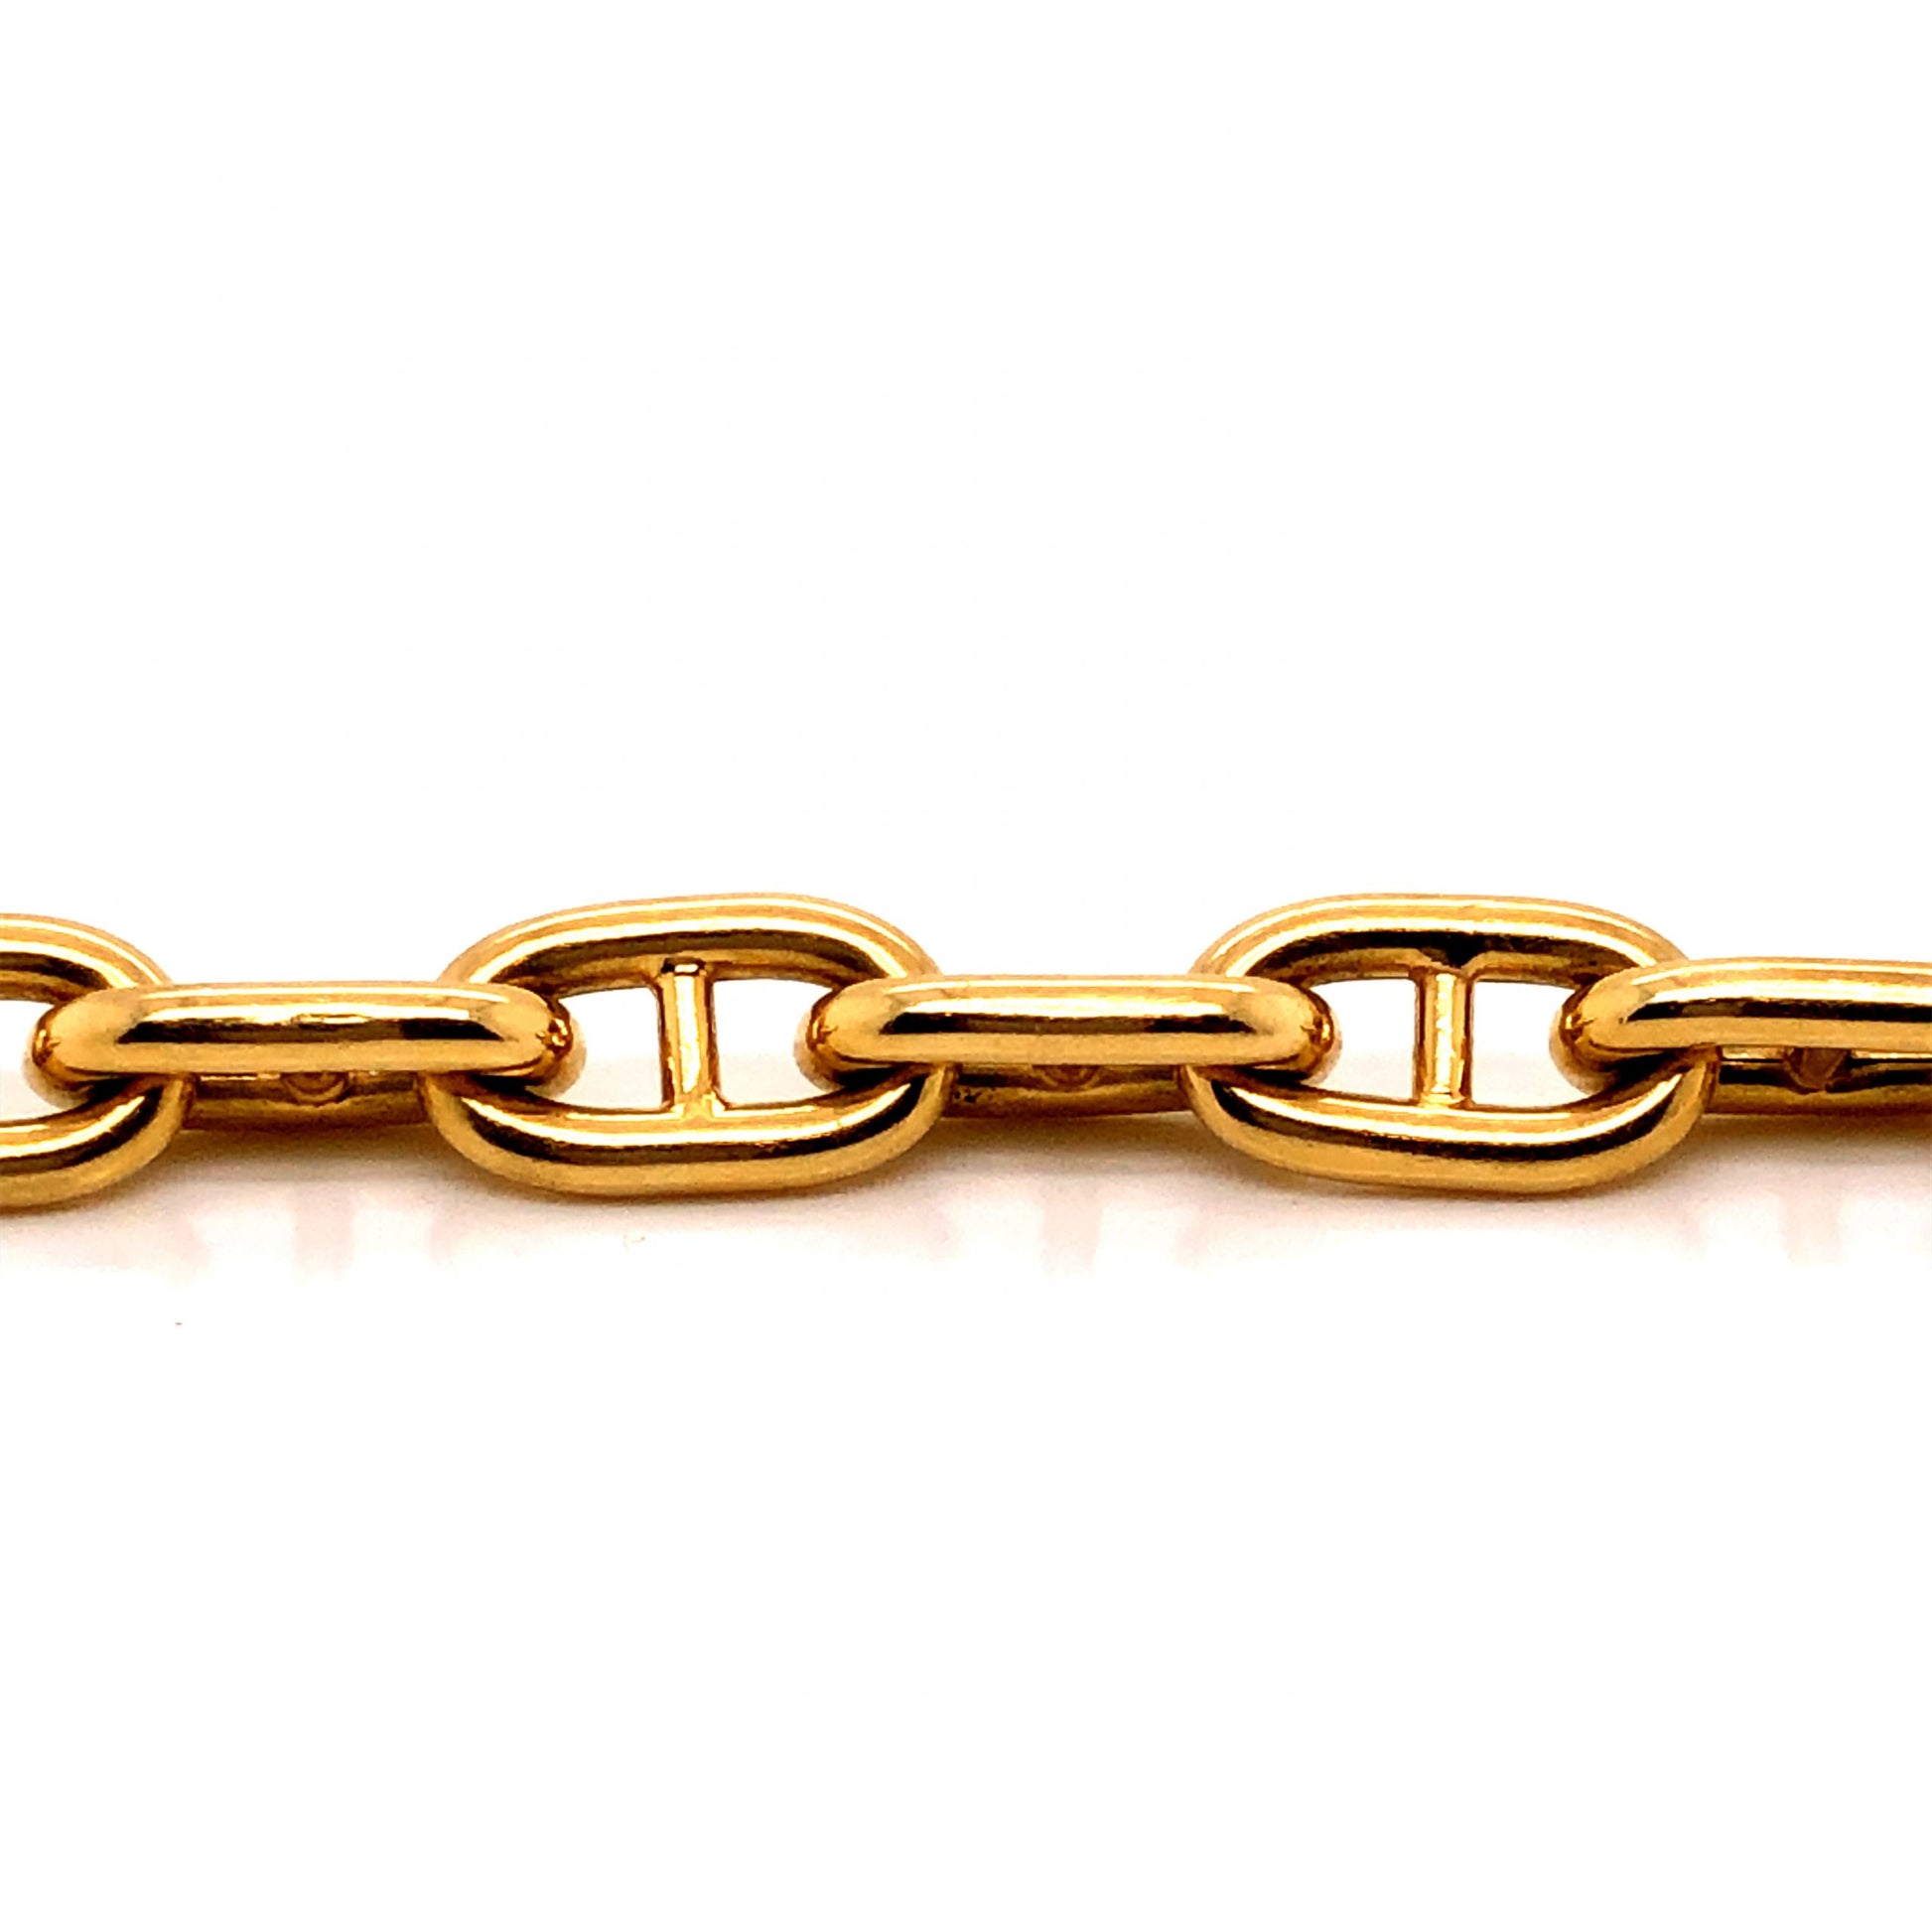 Wide Link Toggle Bracelet in 18k Yellow Gold